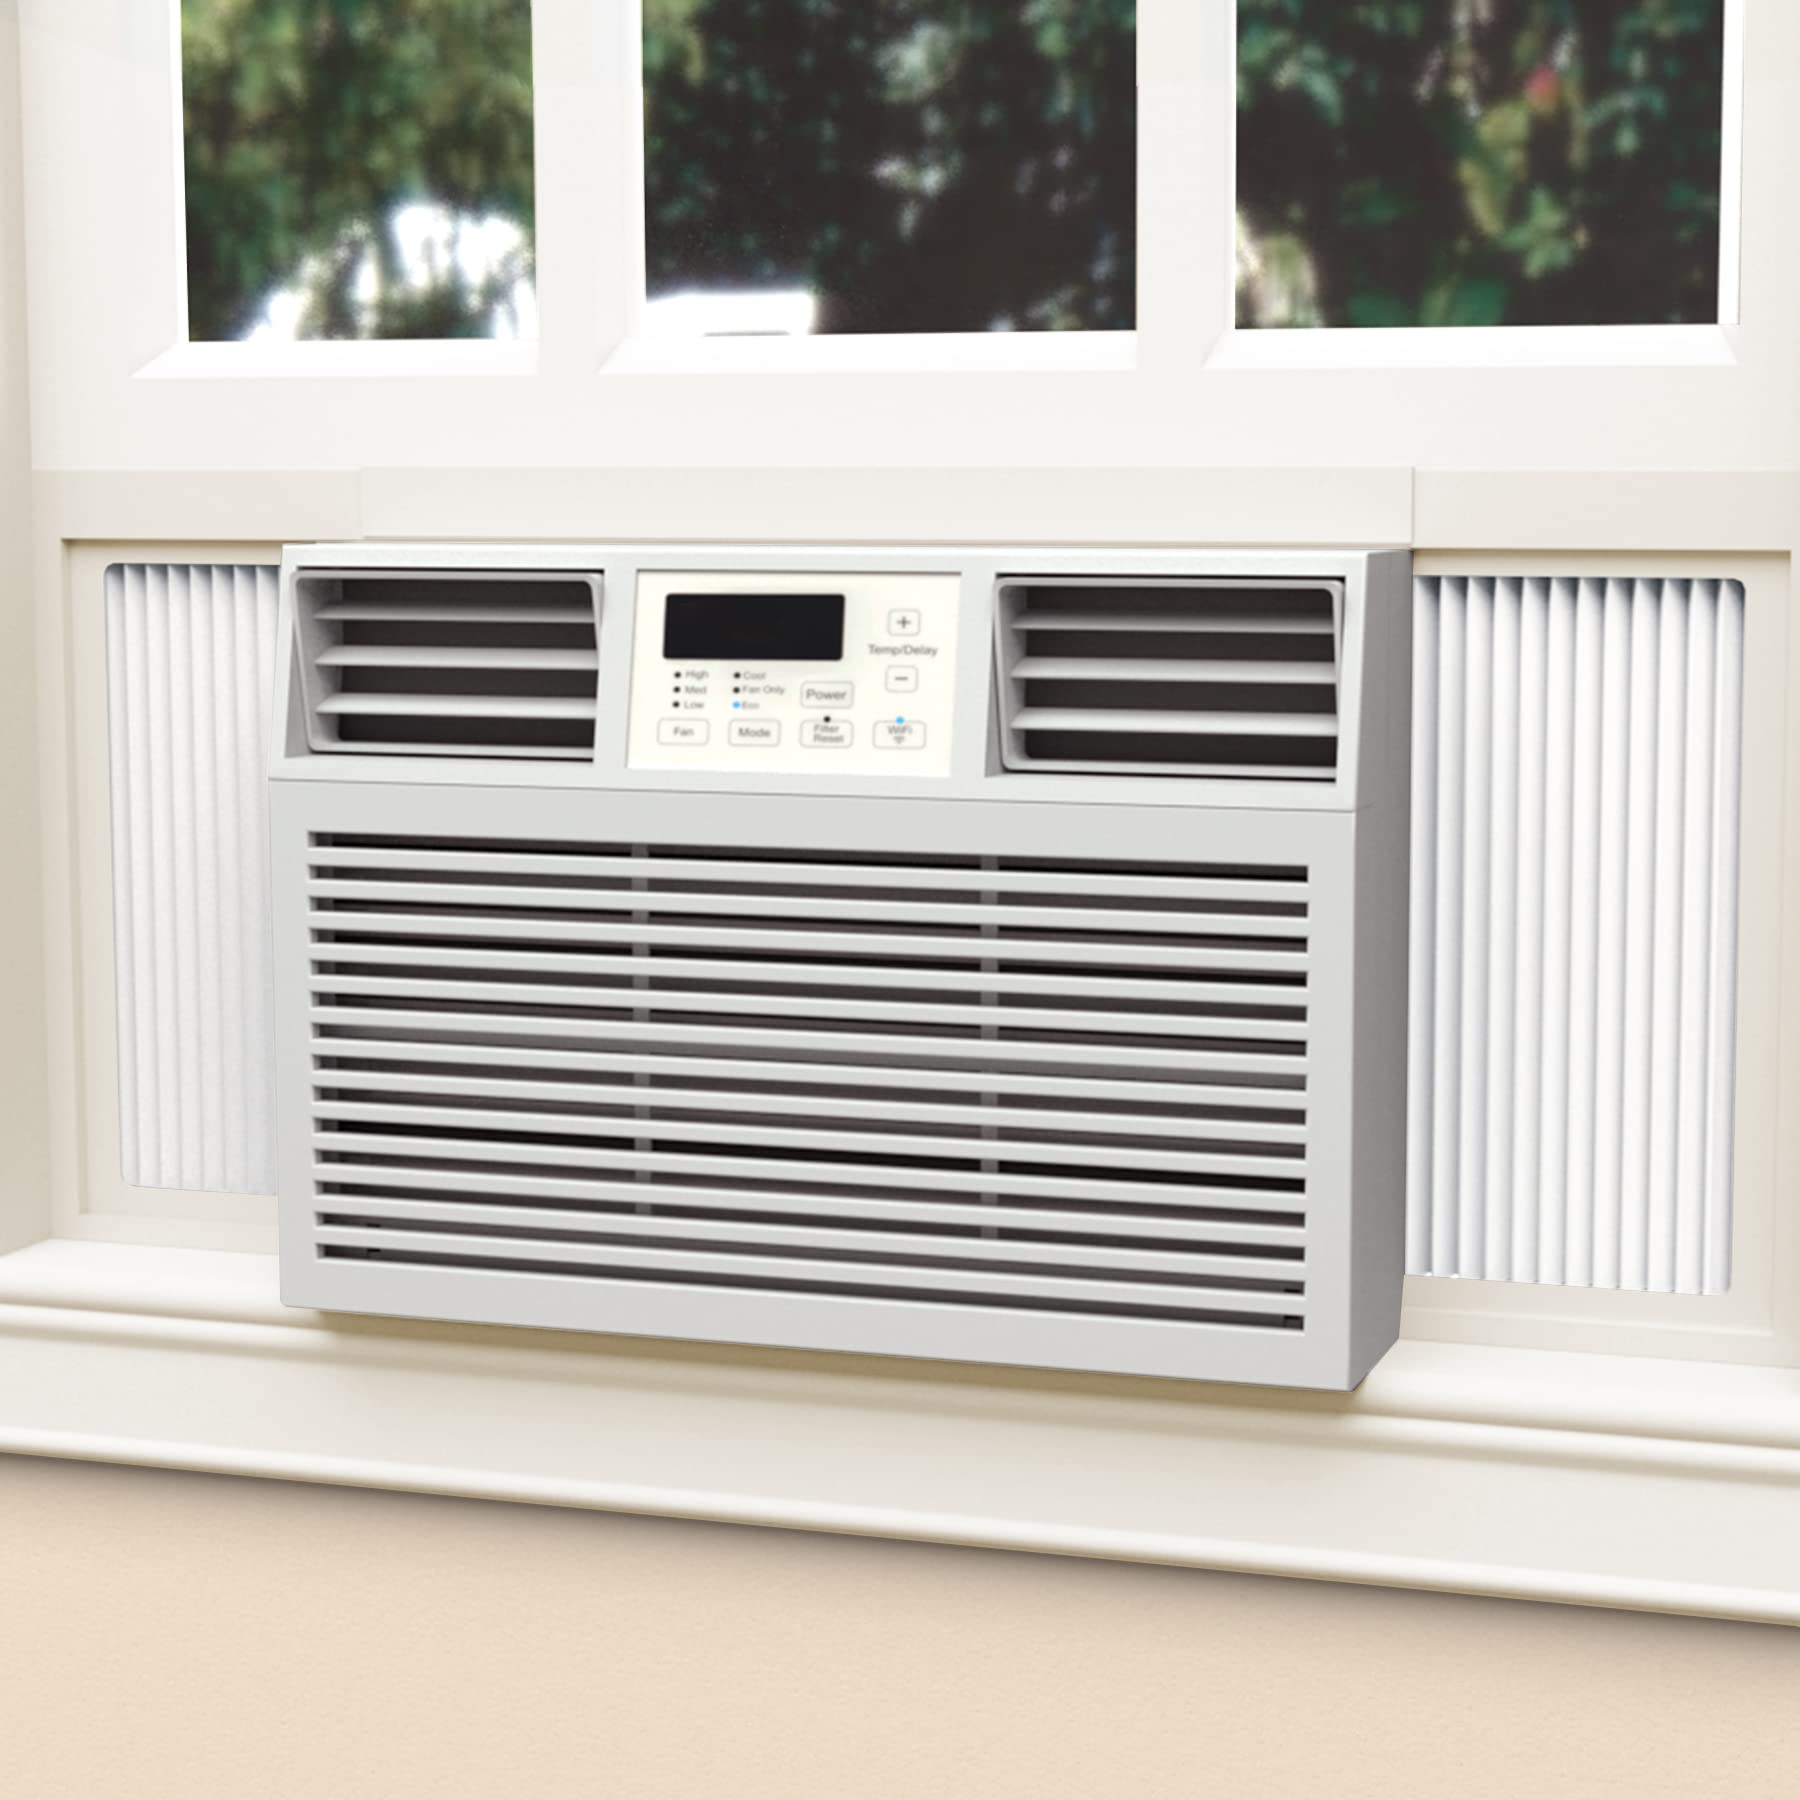 How to Cover Sides of Window Air Conditioner